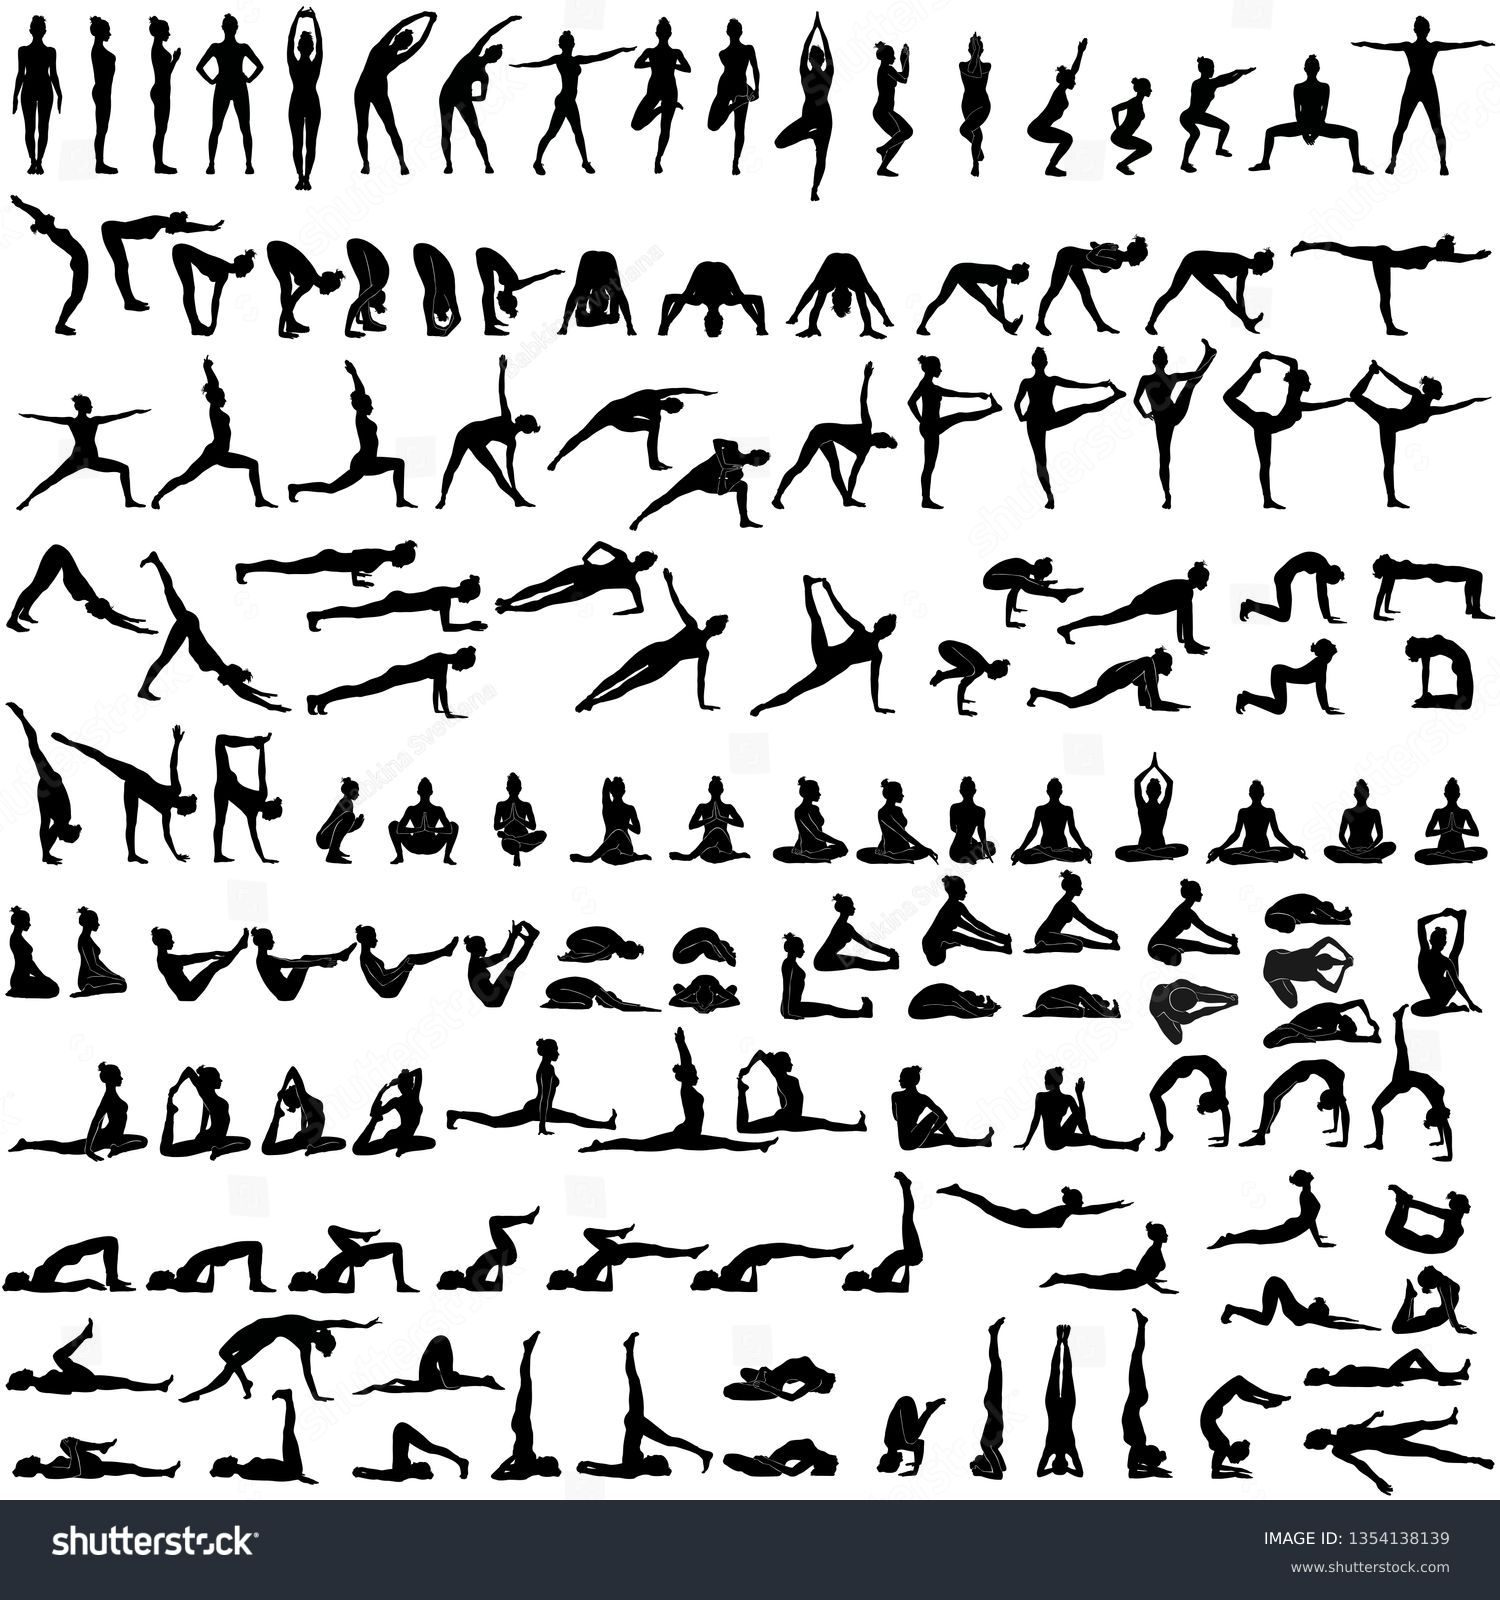 SVG of Big set of silhouettes of woman doing yoga exercises.  Icons of girl stretching and relaxing her body in many different yoga poses. Black shapes of woman isolated on white background. Yoga complex. svg